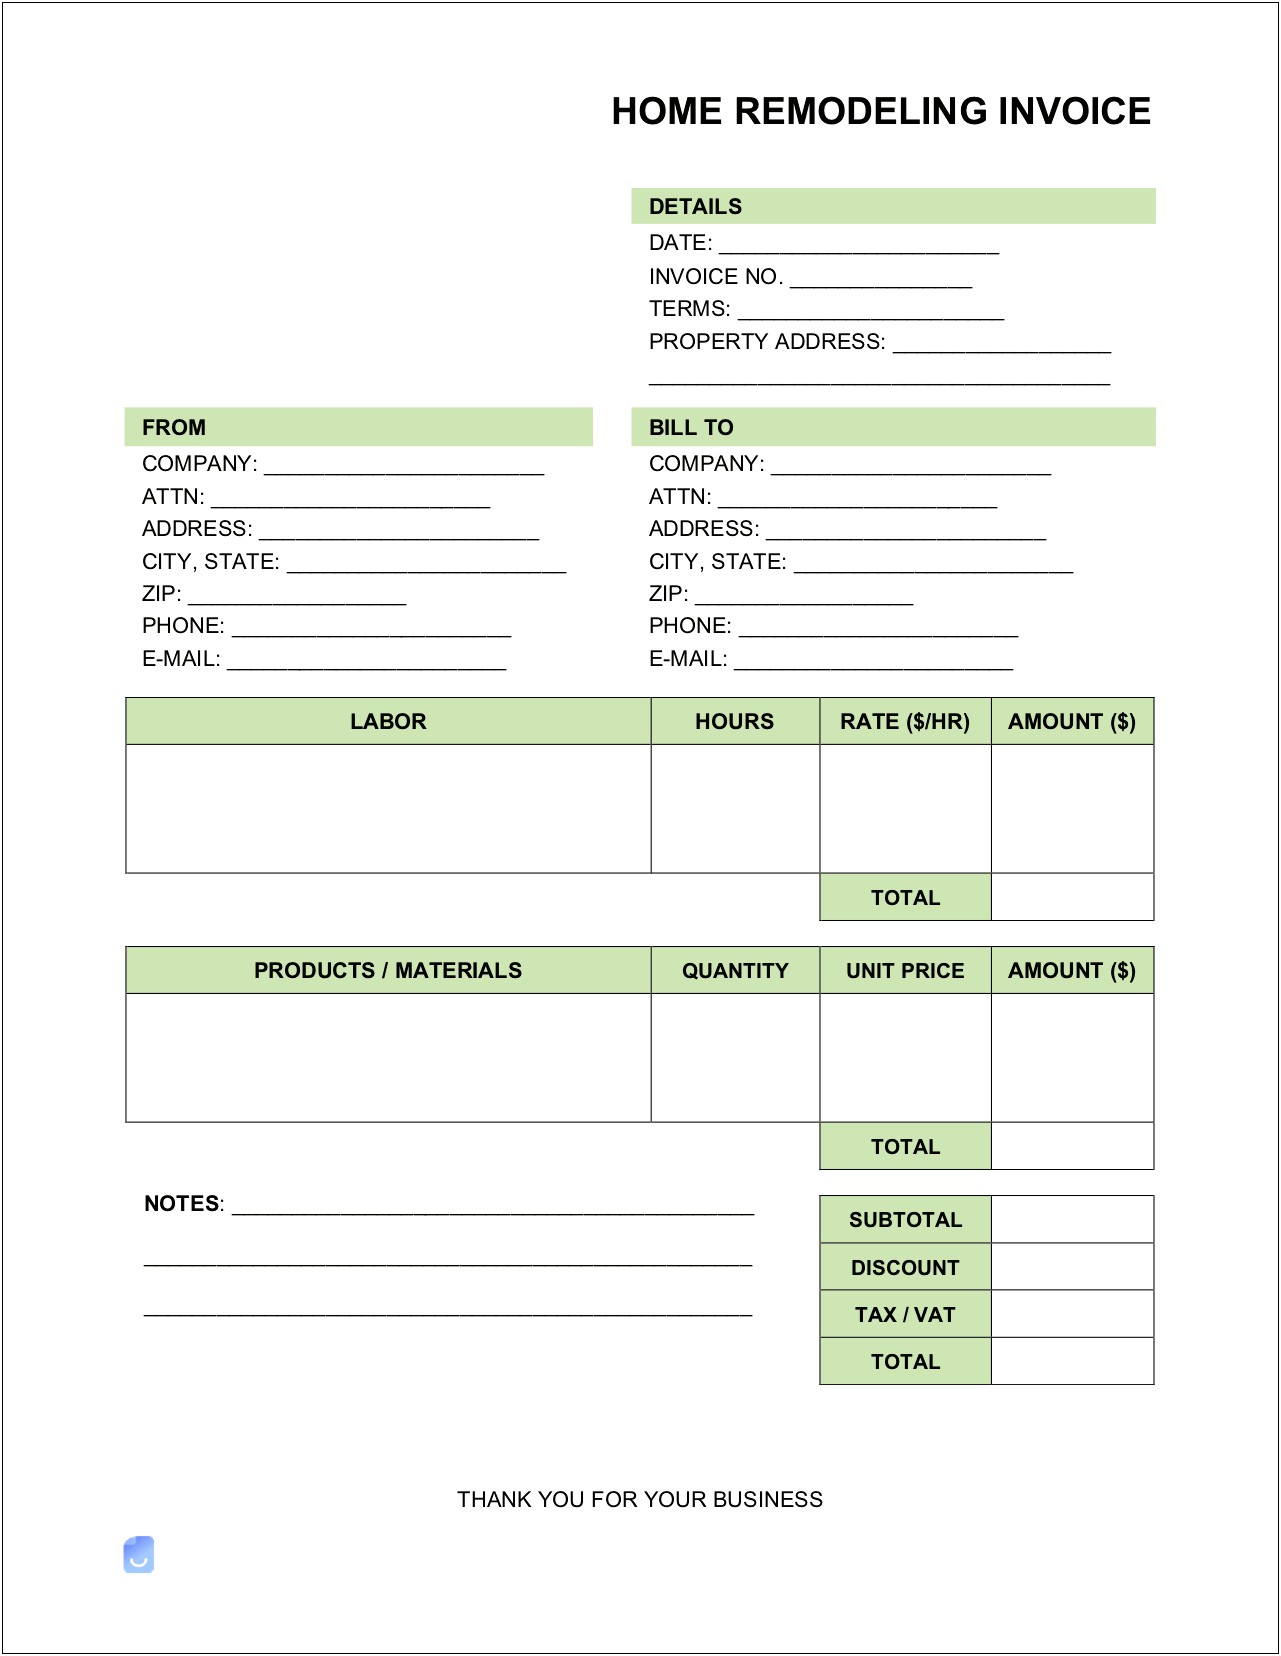 Free Template Invoice For Plumbing In House